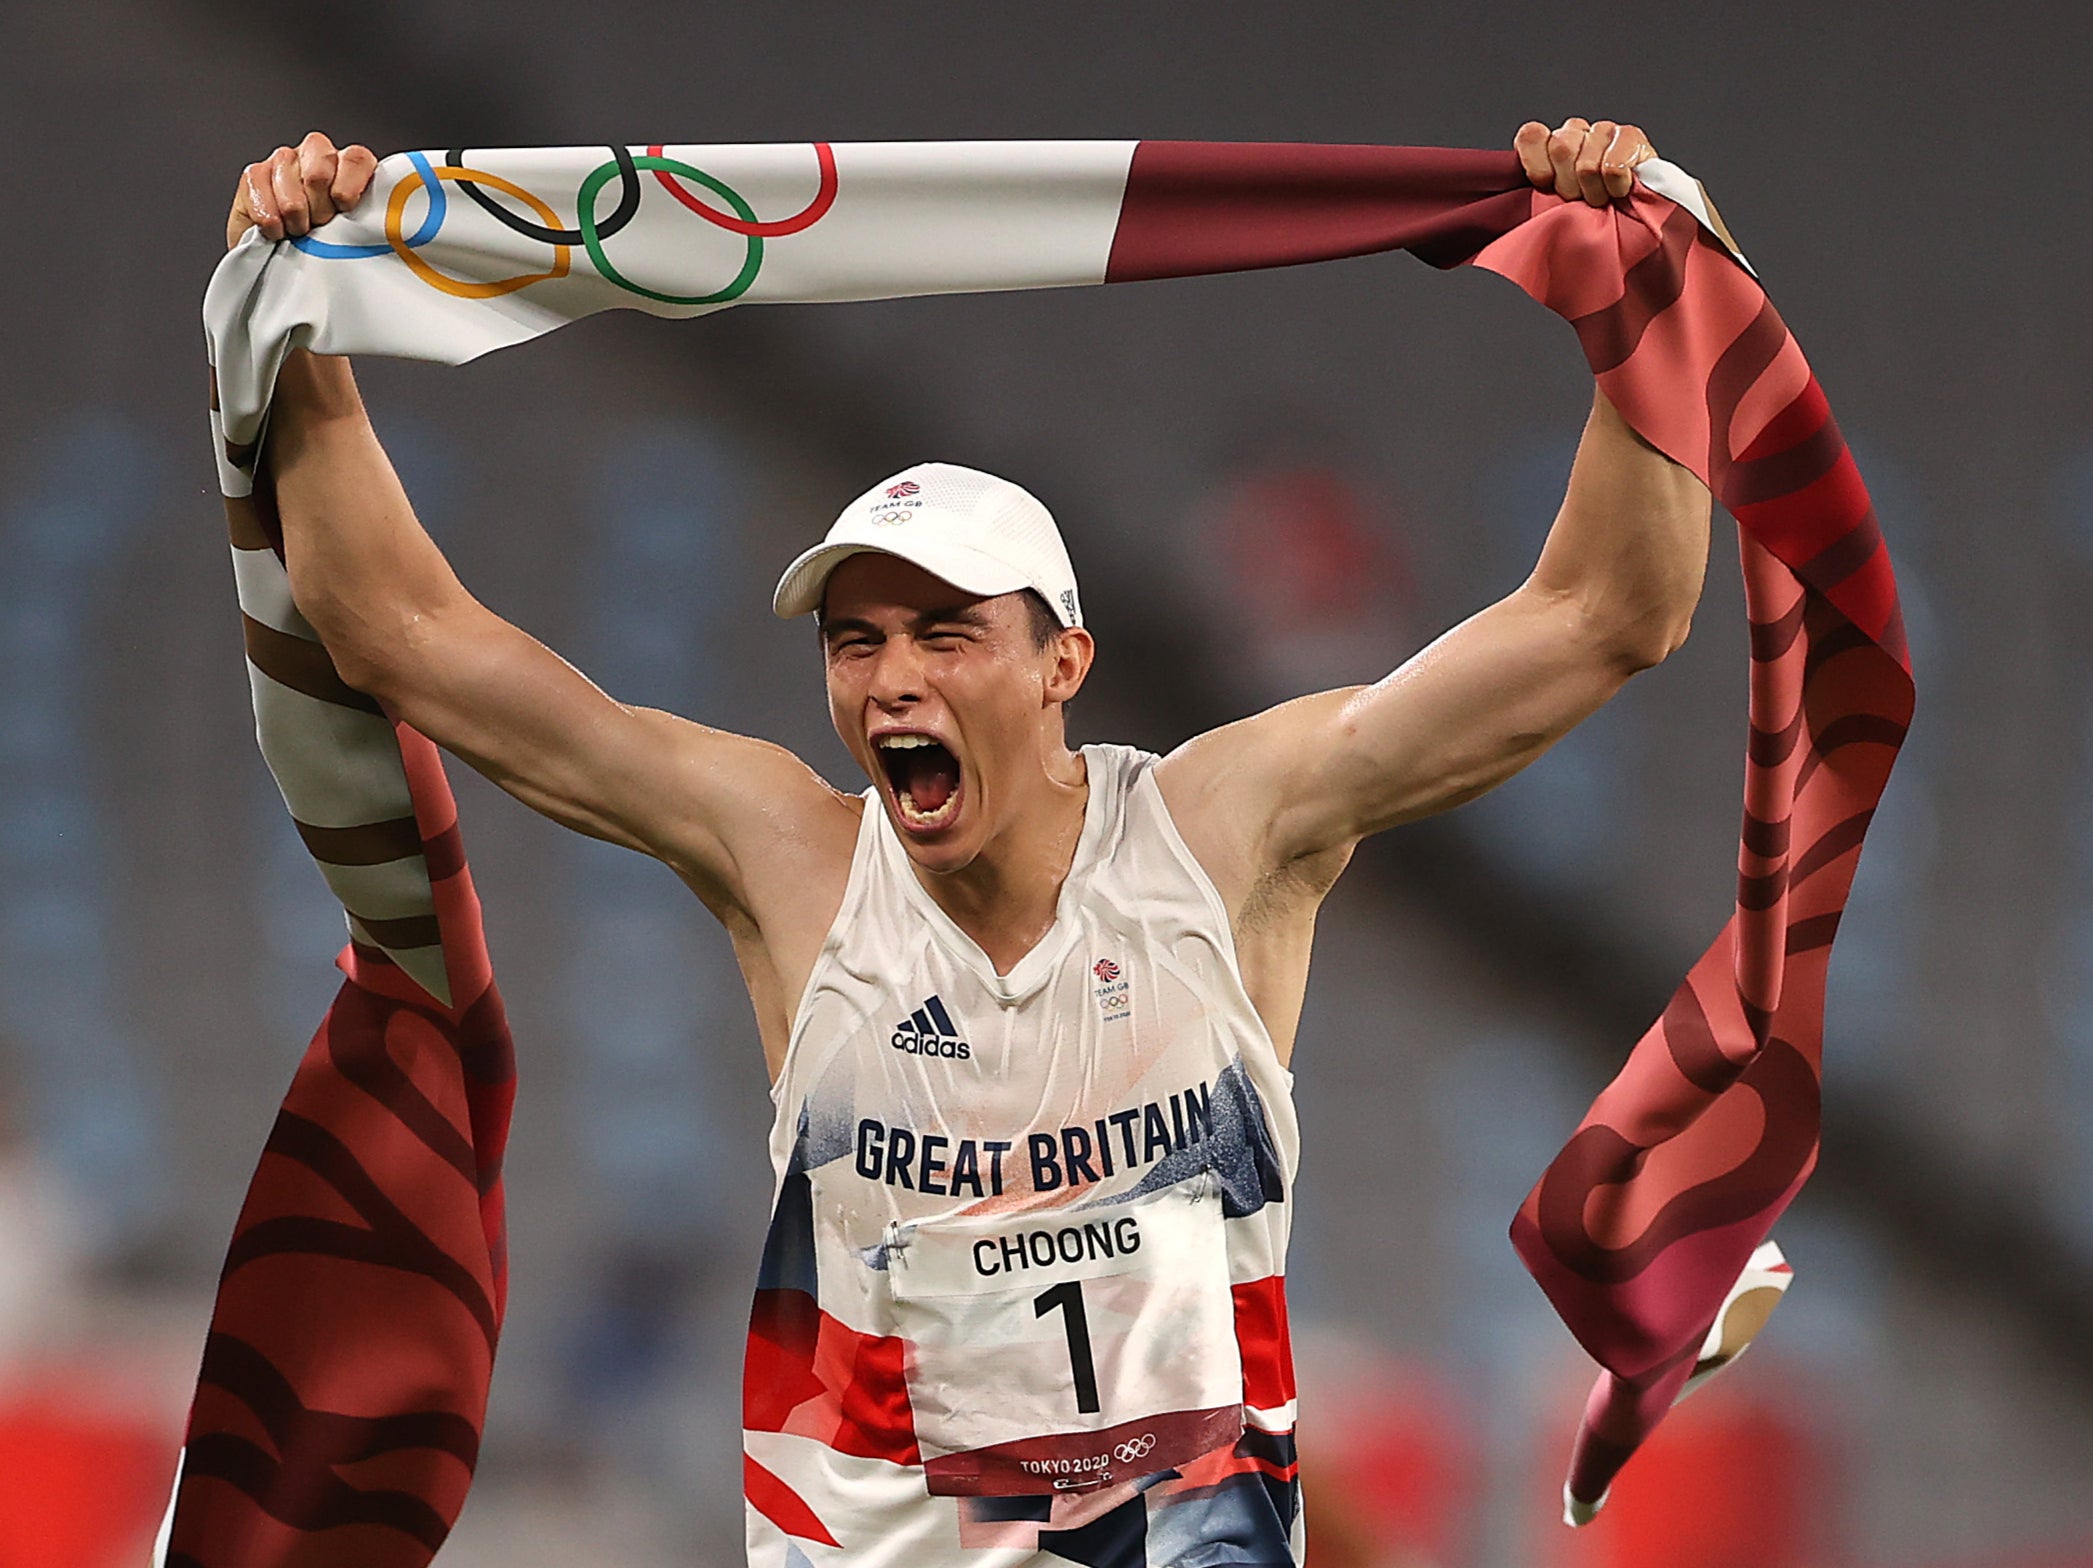 Joseph Choong celebrates after winning the laser run and Olympic gold